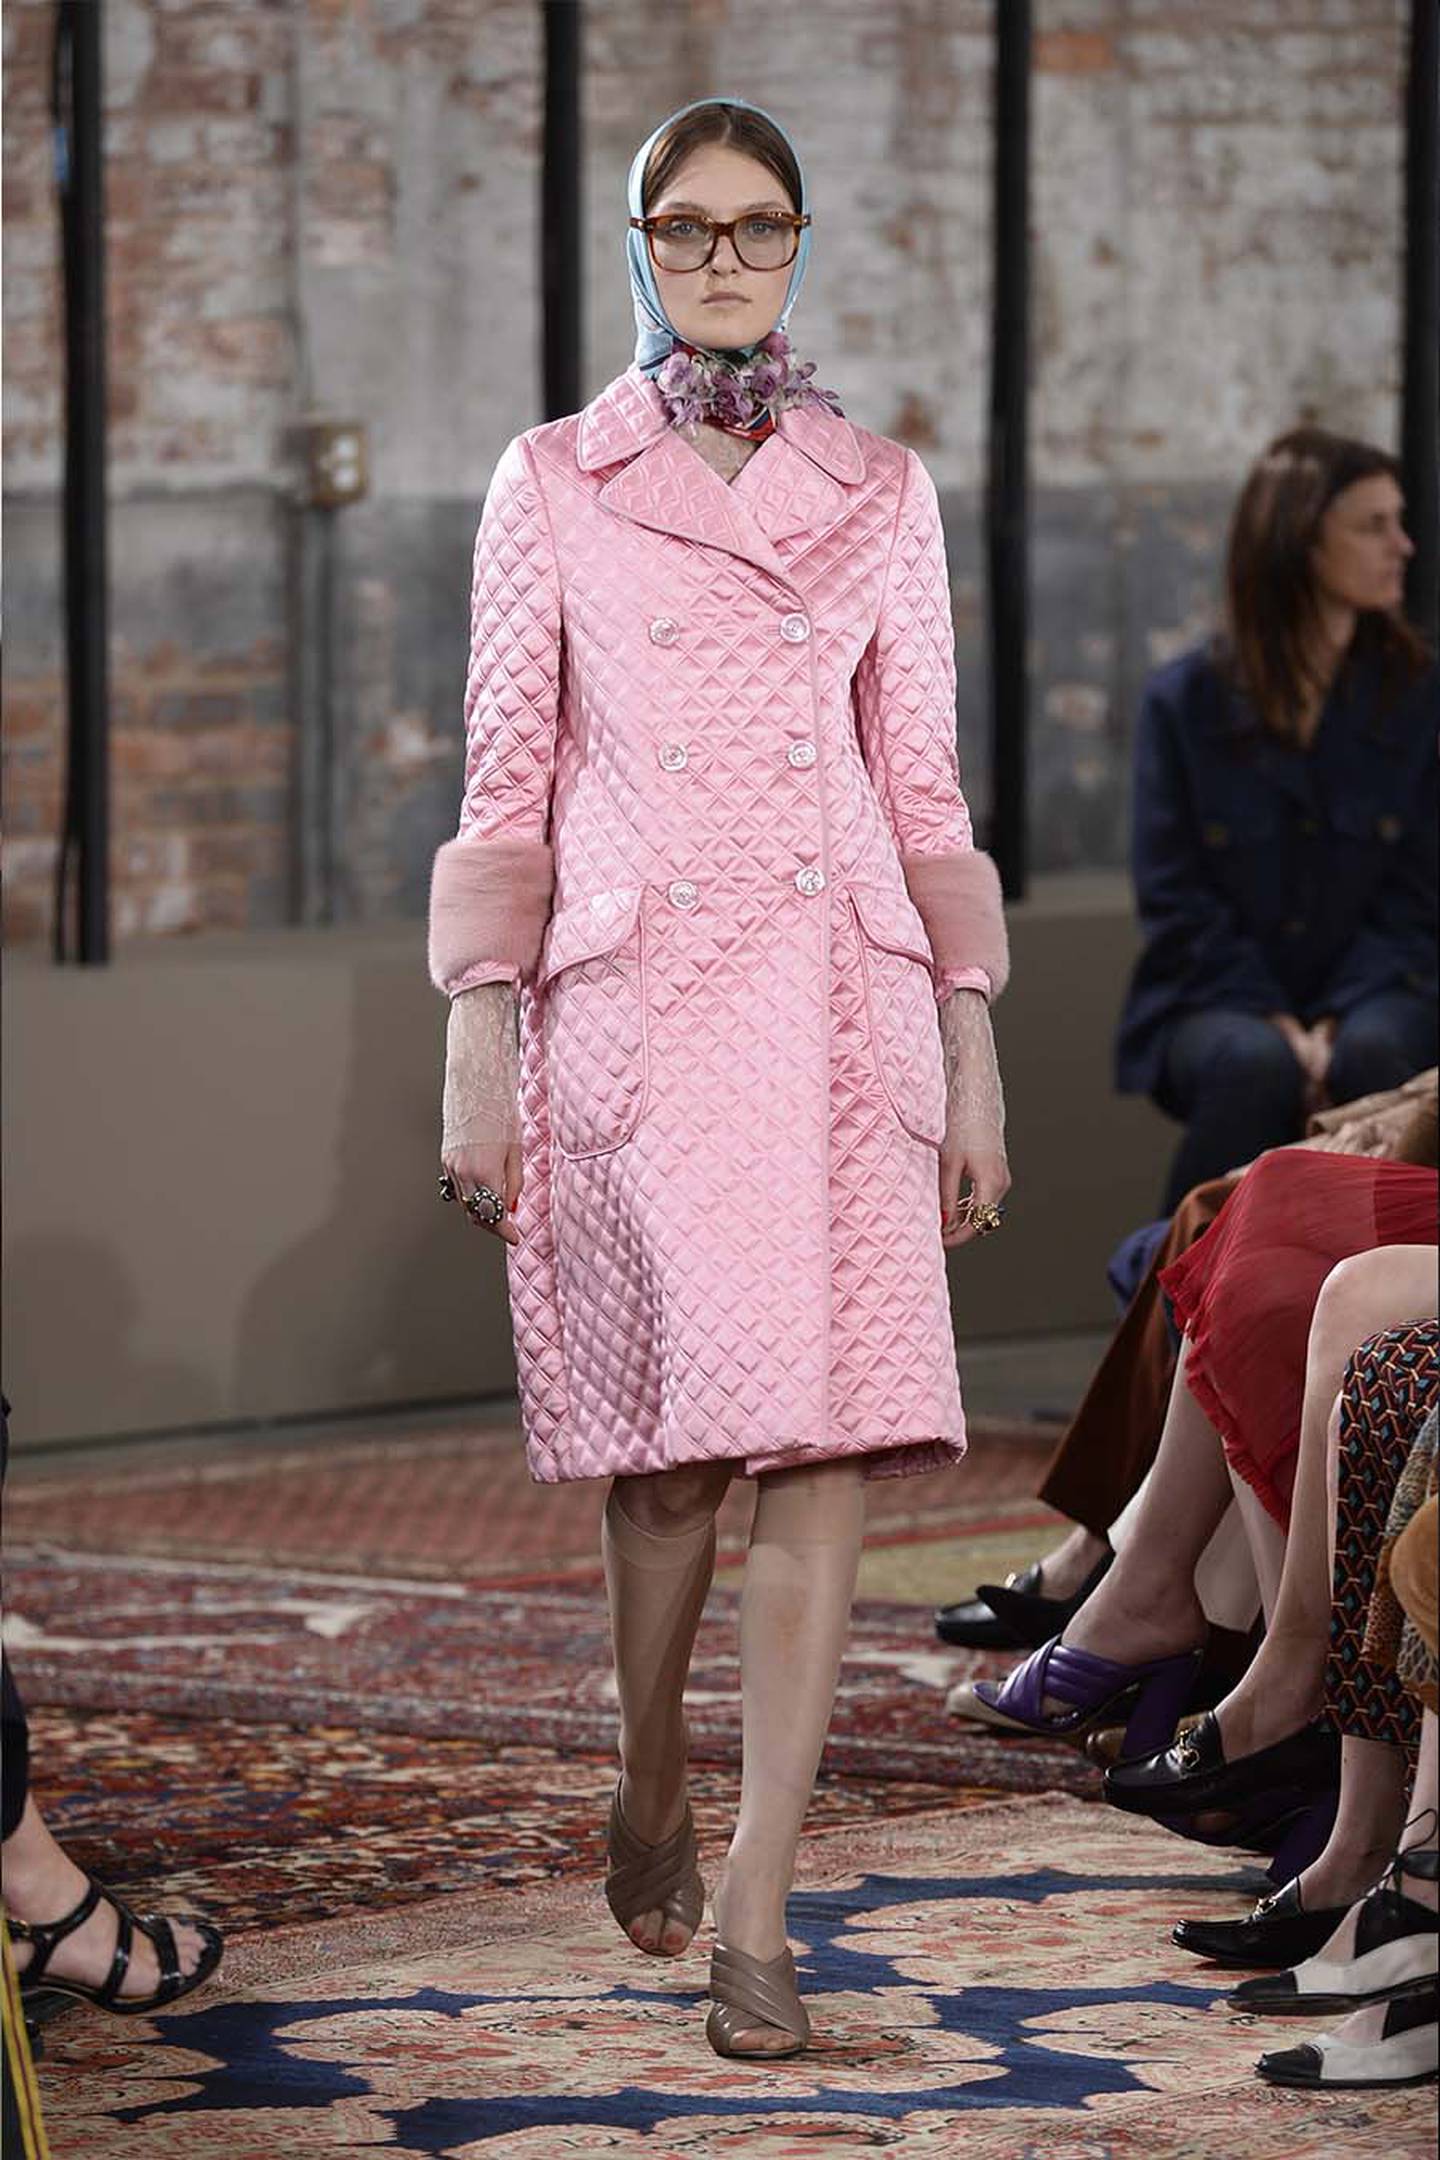 Headscarves like those worn by the Queen have appeared repeatedly in Alessandro Michele’s Gucci shows.